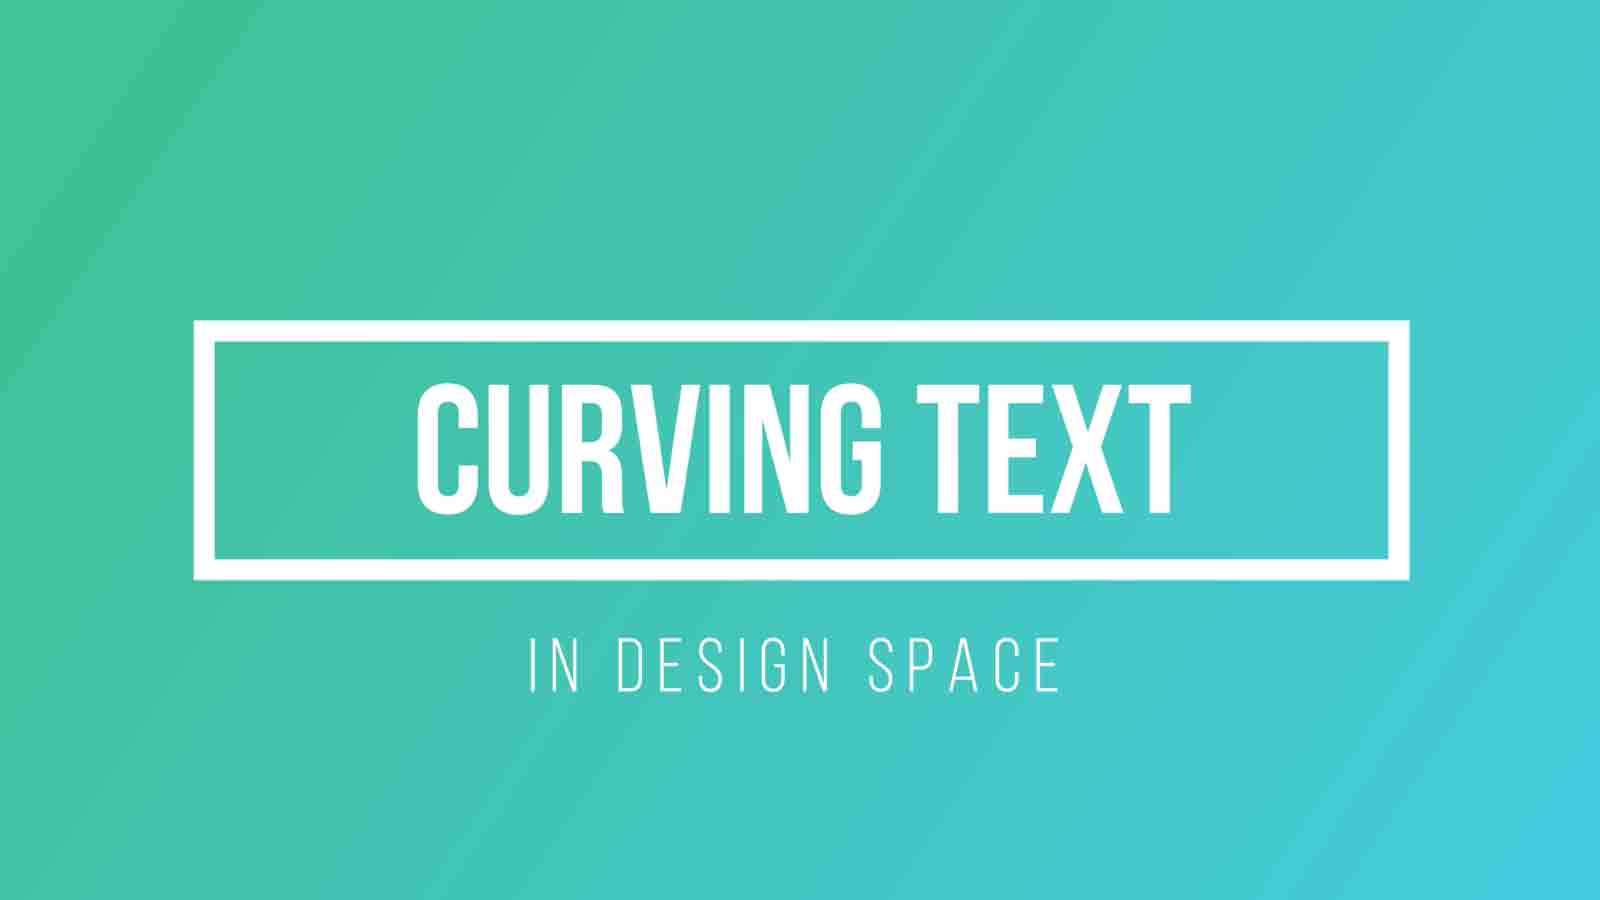 How to Curve Text in Design Space